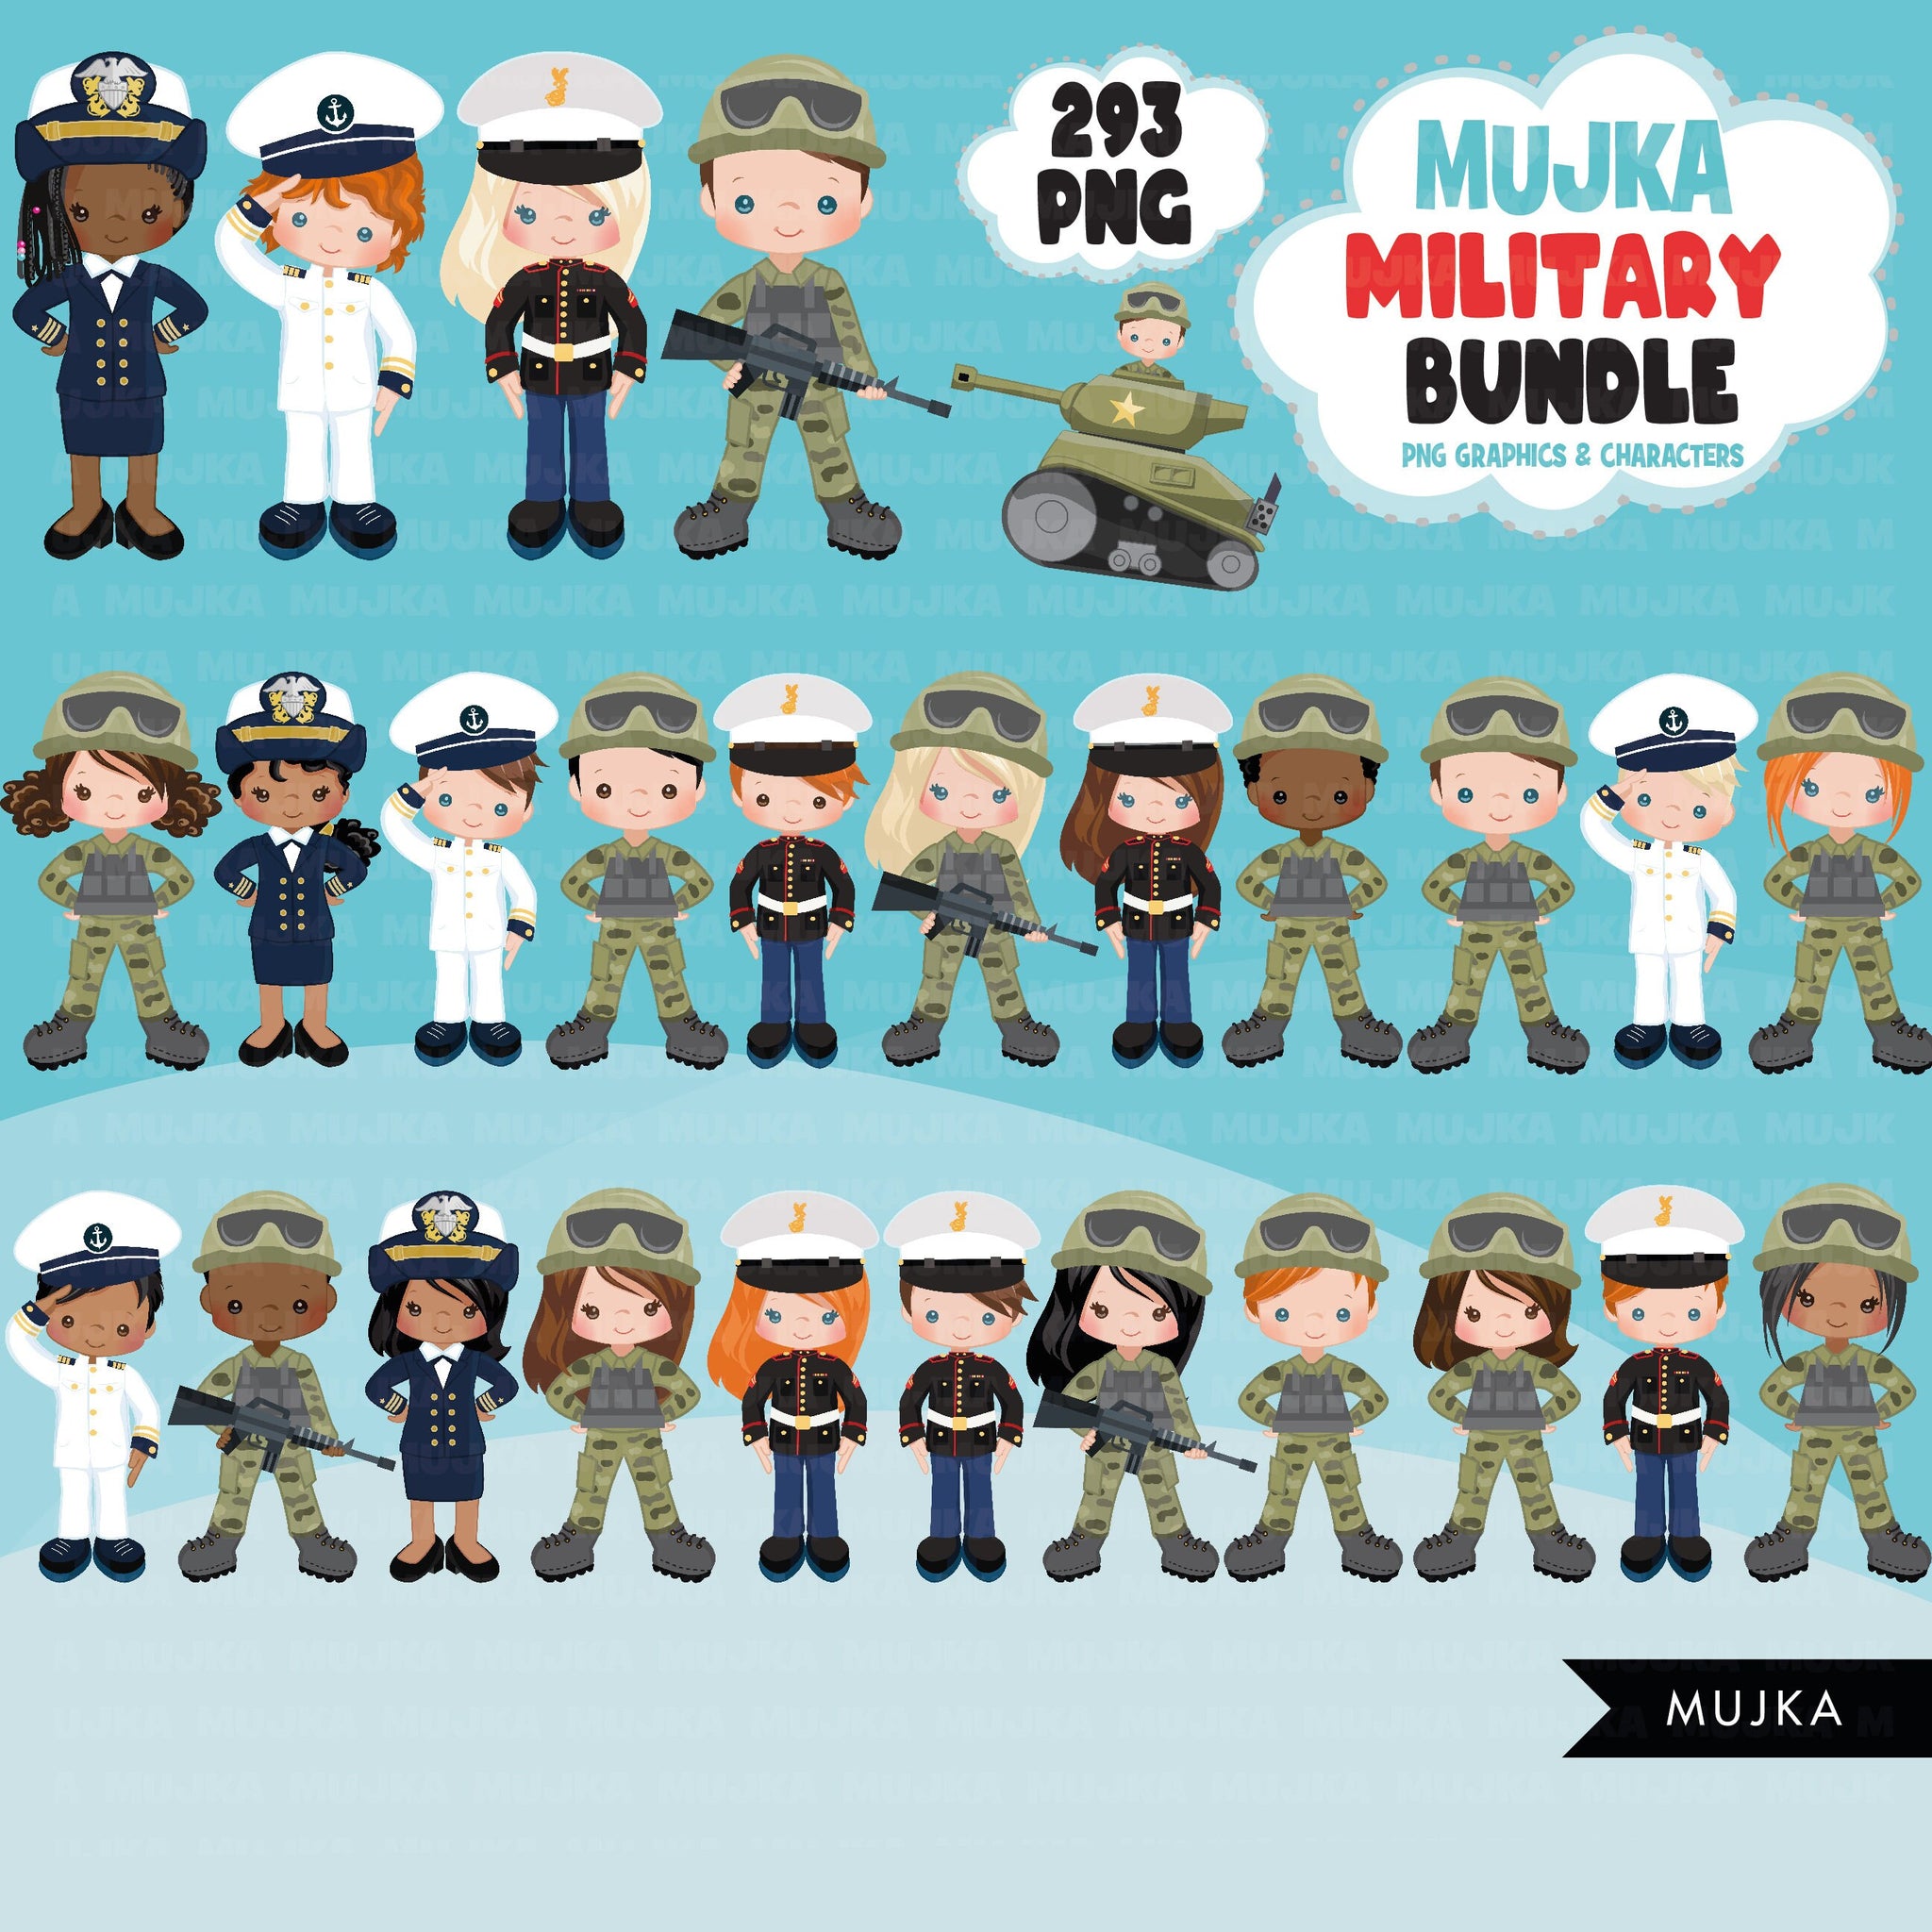 Military PNG Bundle, Soldier clipart, tank soldiers, marines, navy, military graphics, army designs, sublimation designs, digital stickers, boy and girl soldiers